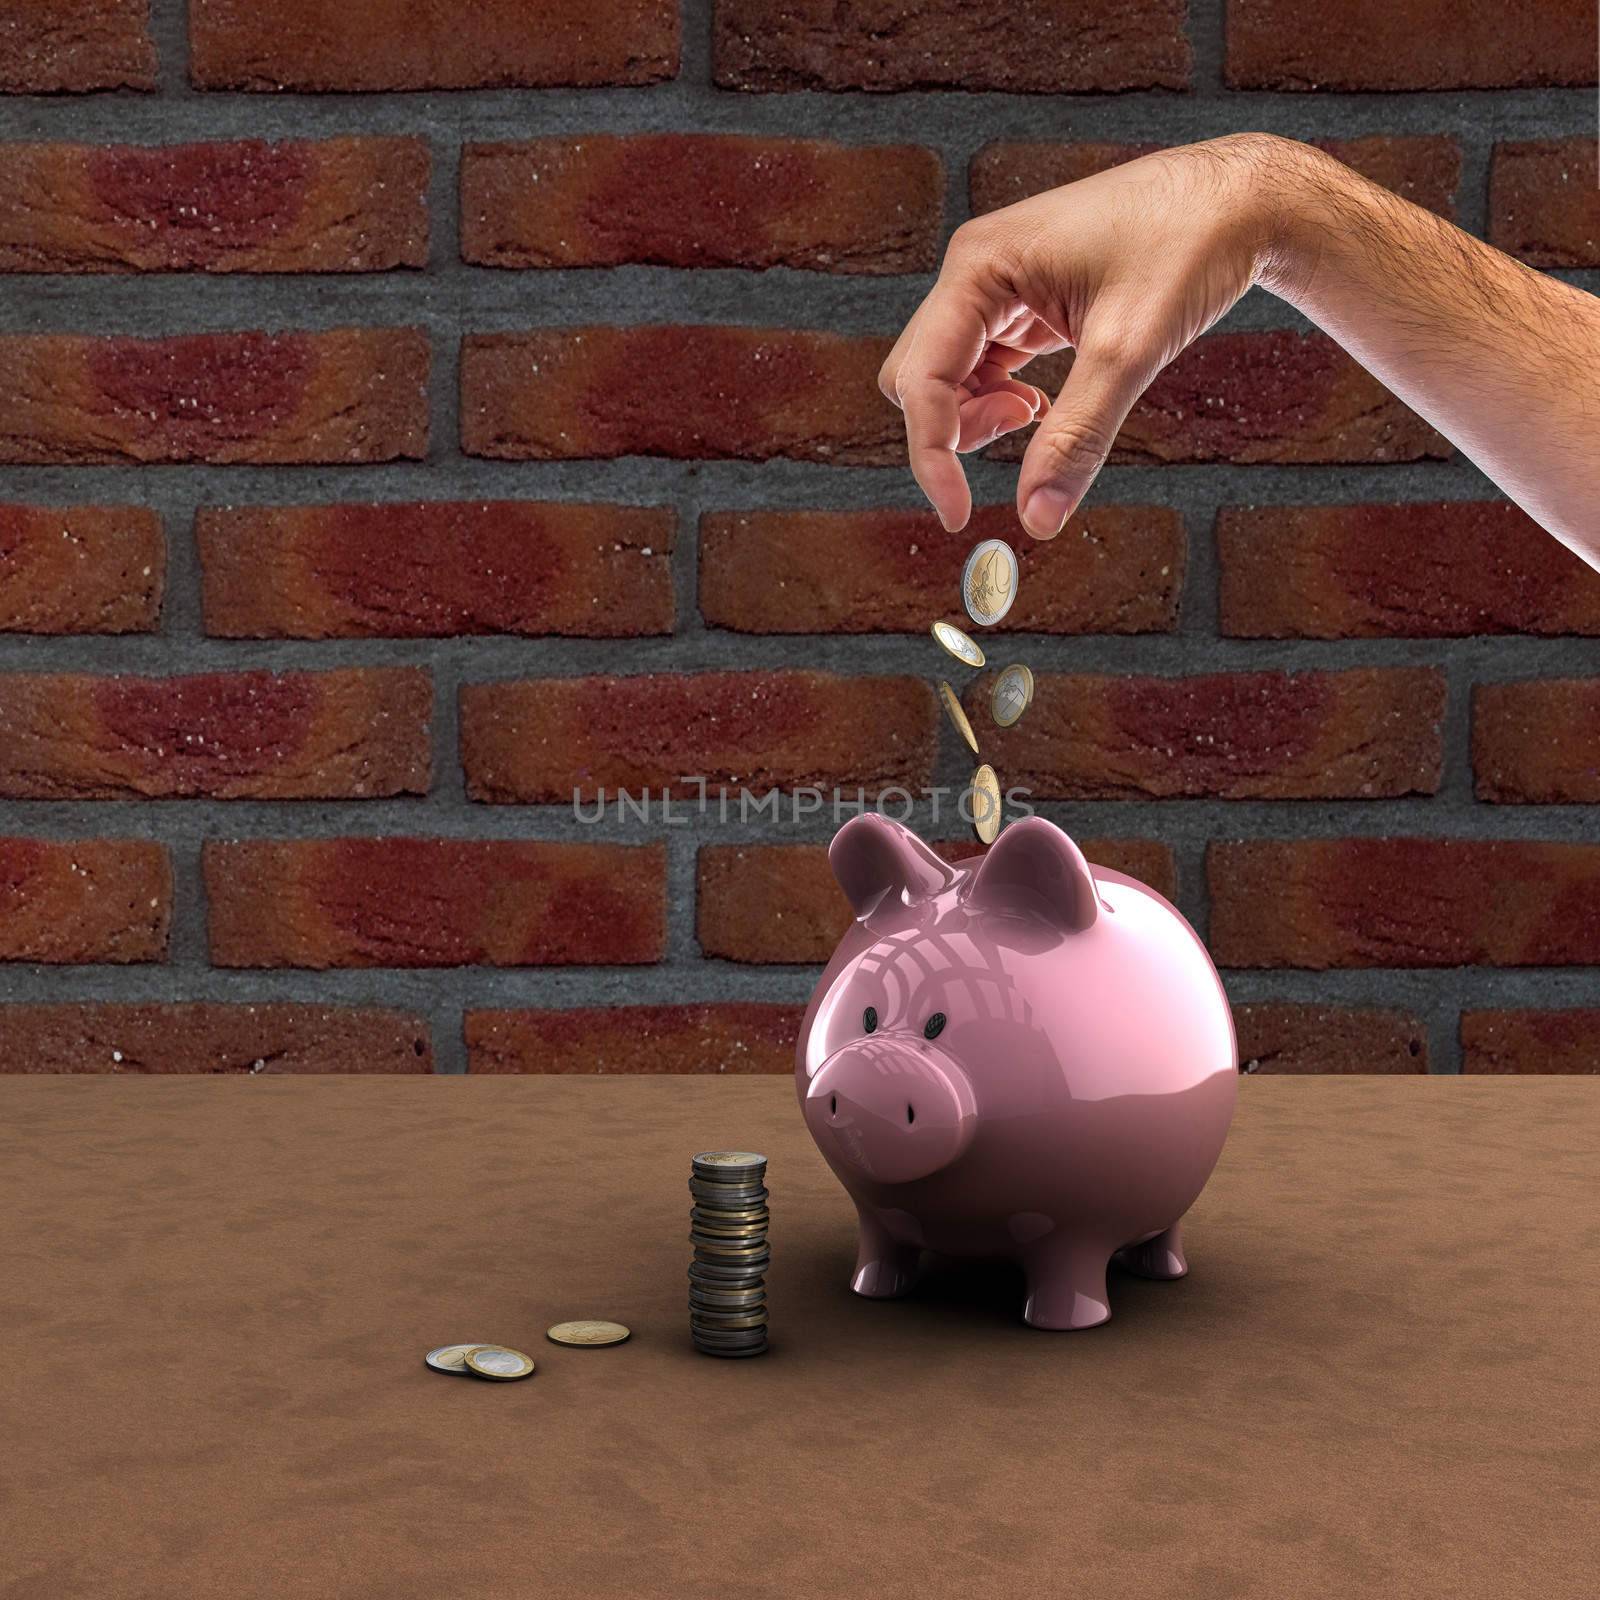 Hand dropping coins into a piggy bank